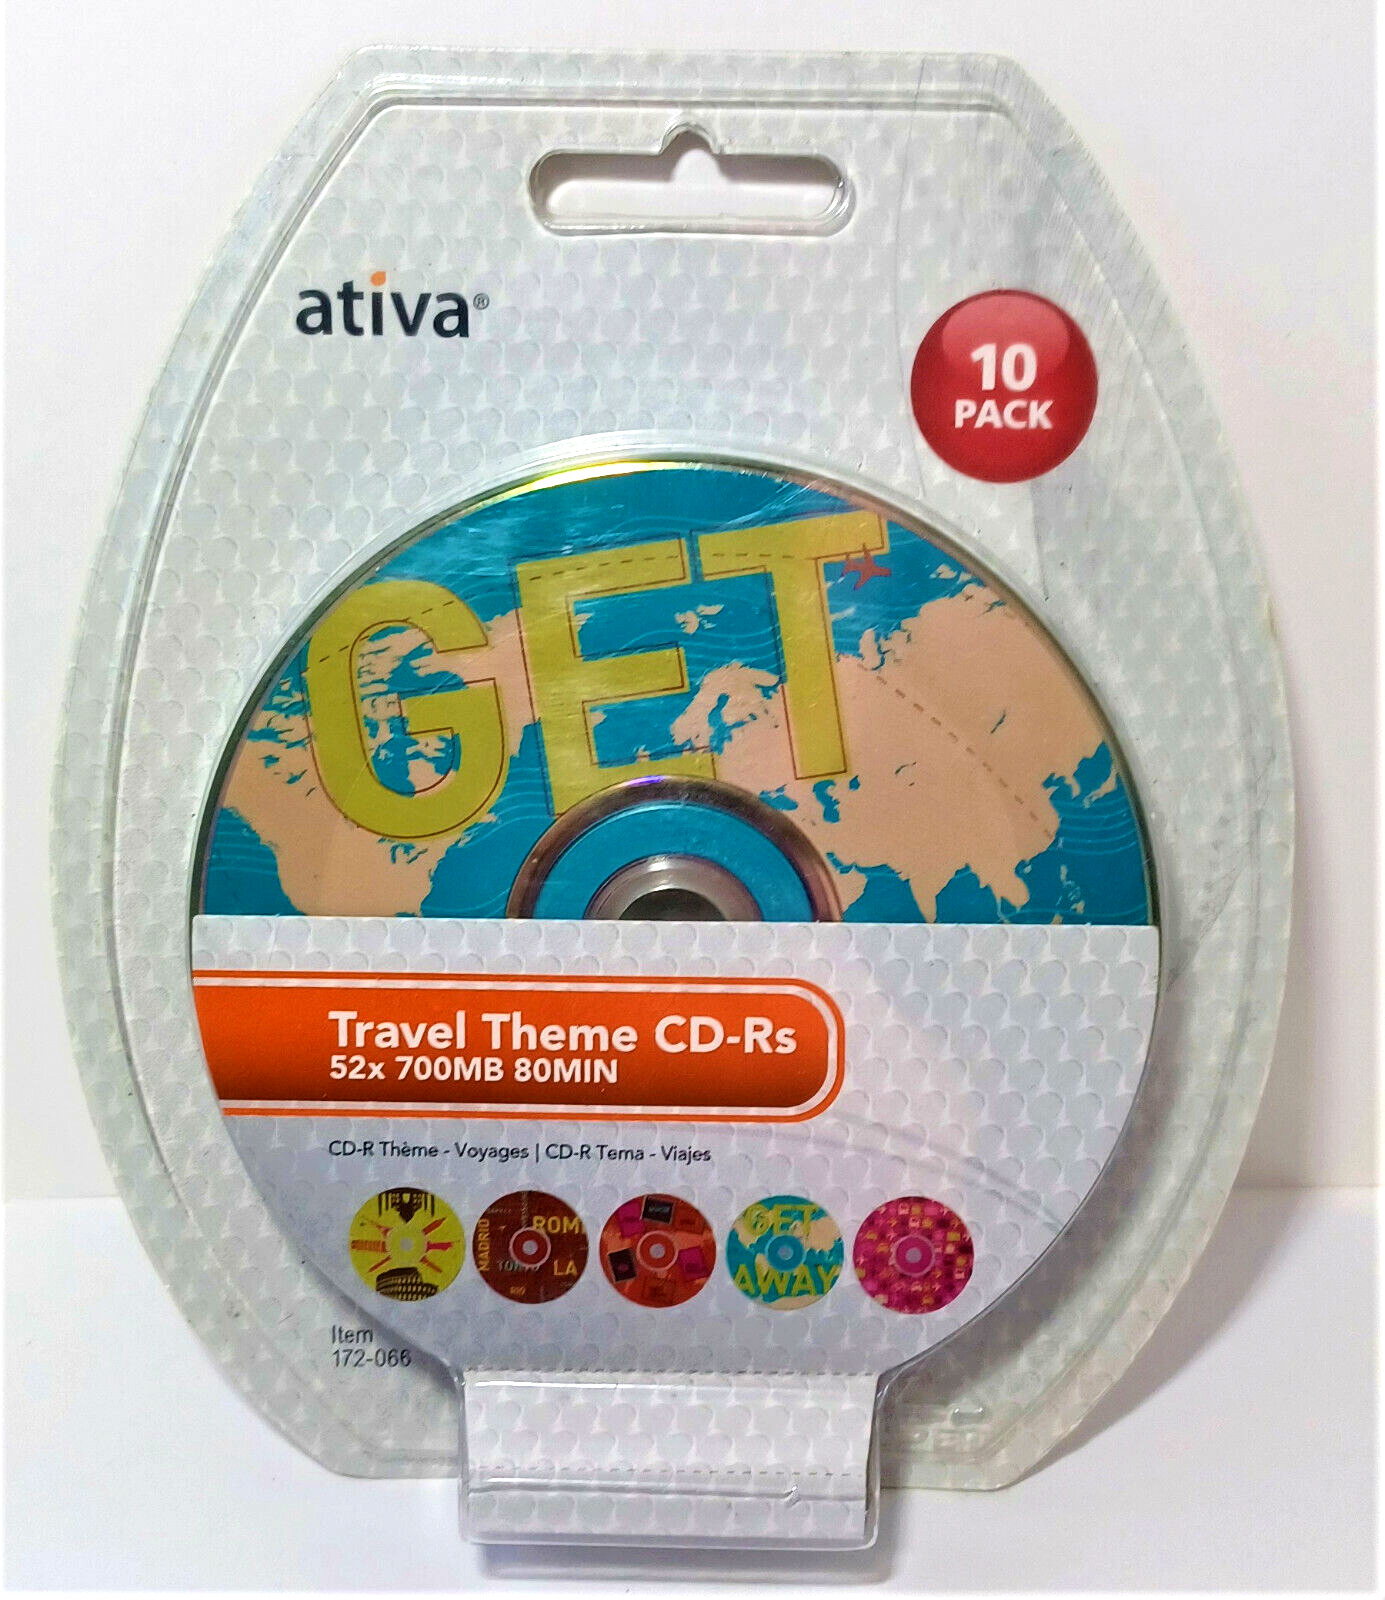 Vtg Ativa CD-R 10 Pack Travel Theme 700MB 80 Minutes Factory Sealed